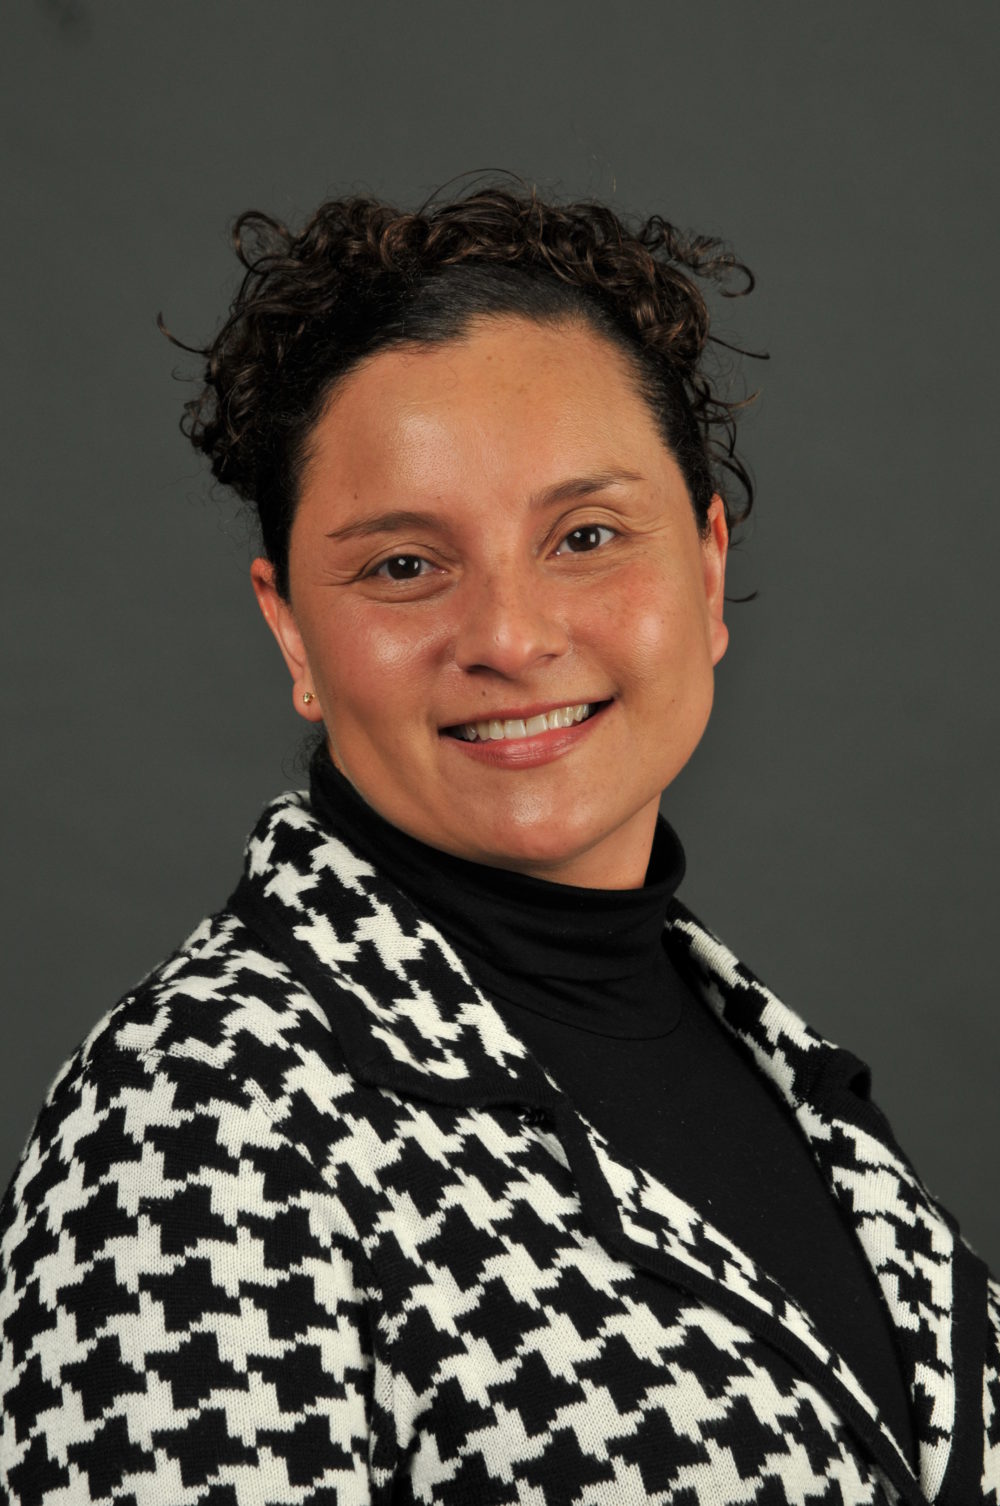 Unhelpful Social Narrative: Marcy Peake (headshot), director of diversity and community outreach initiatives in the College of Education and Human Development at Western Michigan University, smiling woman with houndstooth jacket, black top. 